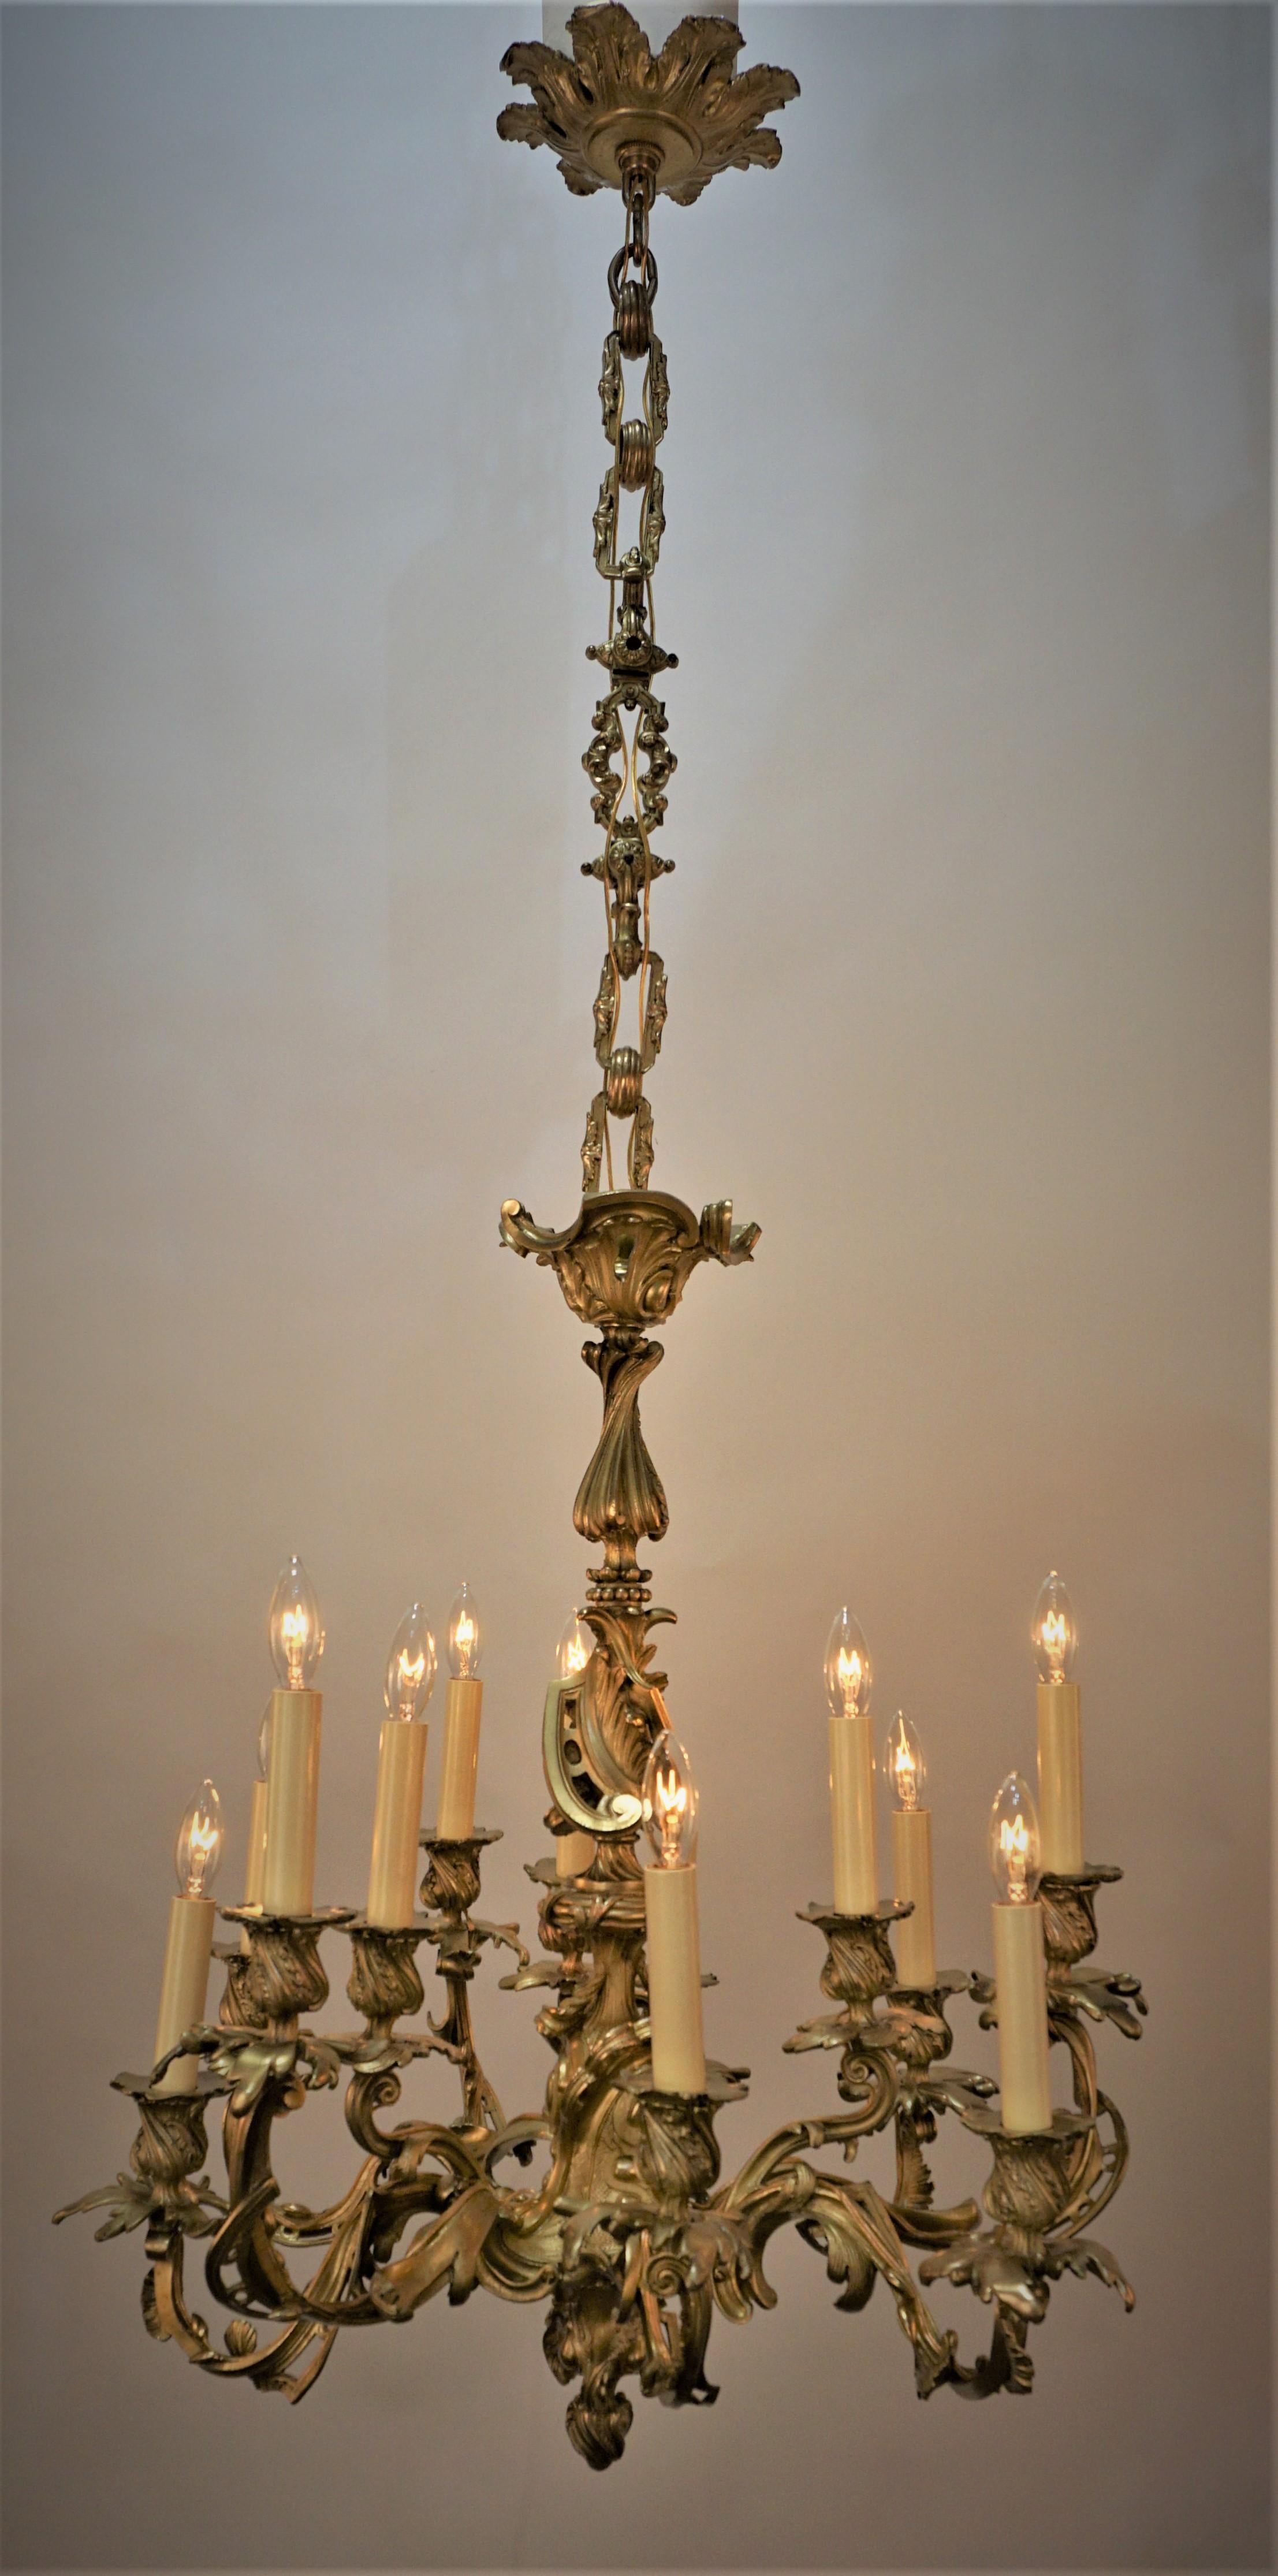 19th century twelve candle lights bronze chandelier that has been professionally electrified and is ready for installation. 
Measurement: 25